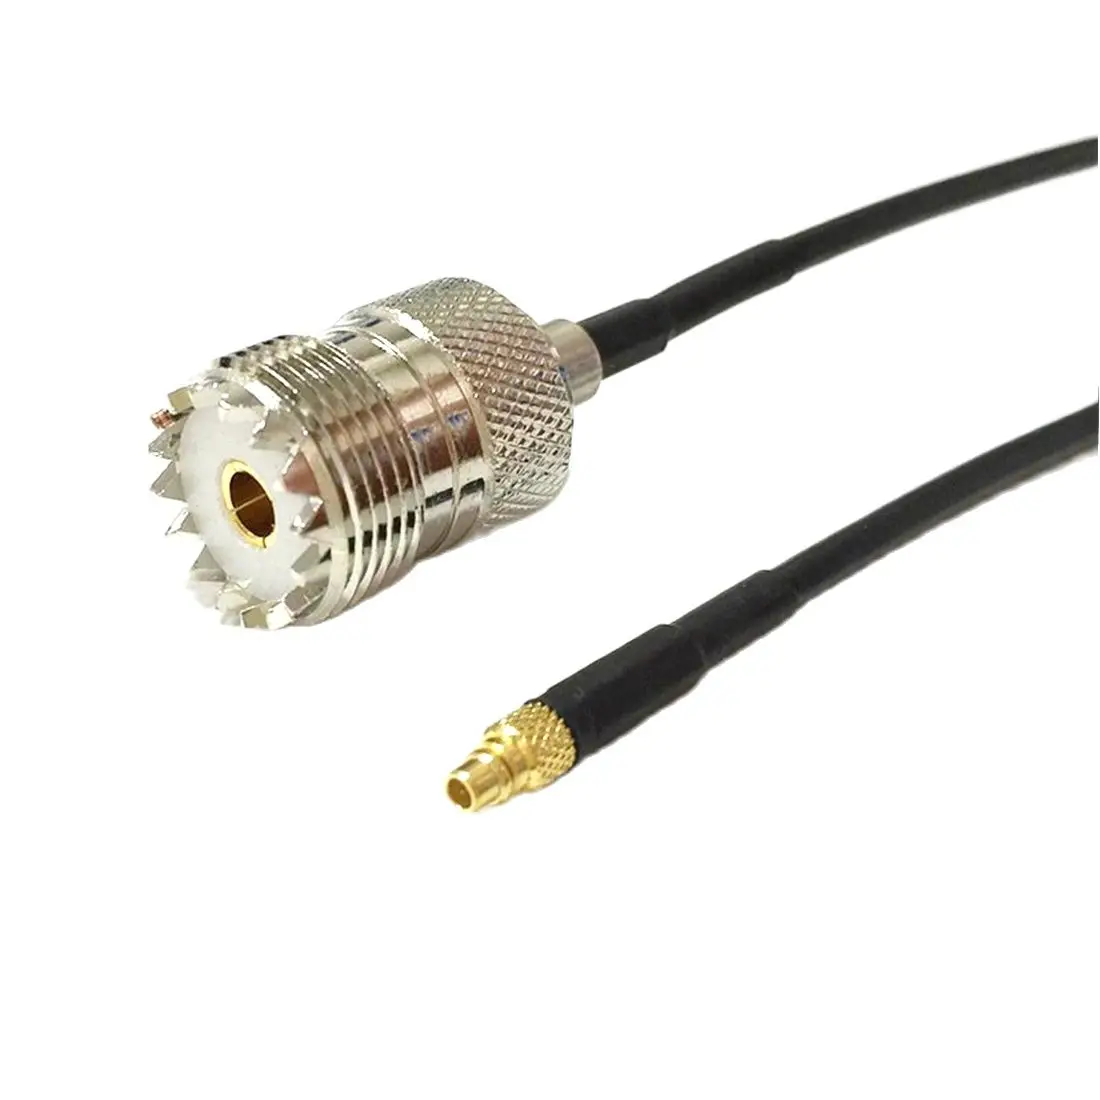 New Modem Coaxial Cable UHF Female Jack Connector Switch MMCX Male Plug Connector RG174 Cable 20CM 8inch Adapter pink 5 meter 316 coaxial cable uhf pl 259 male to female for qyt kt 8900 yaesu icom kenwood mobile radio walkie talkie antenna